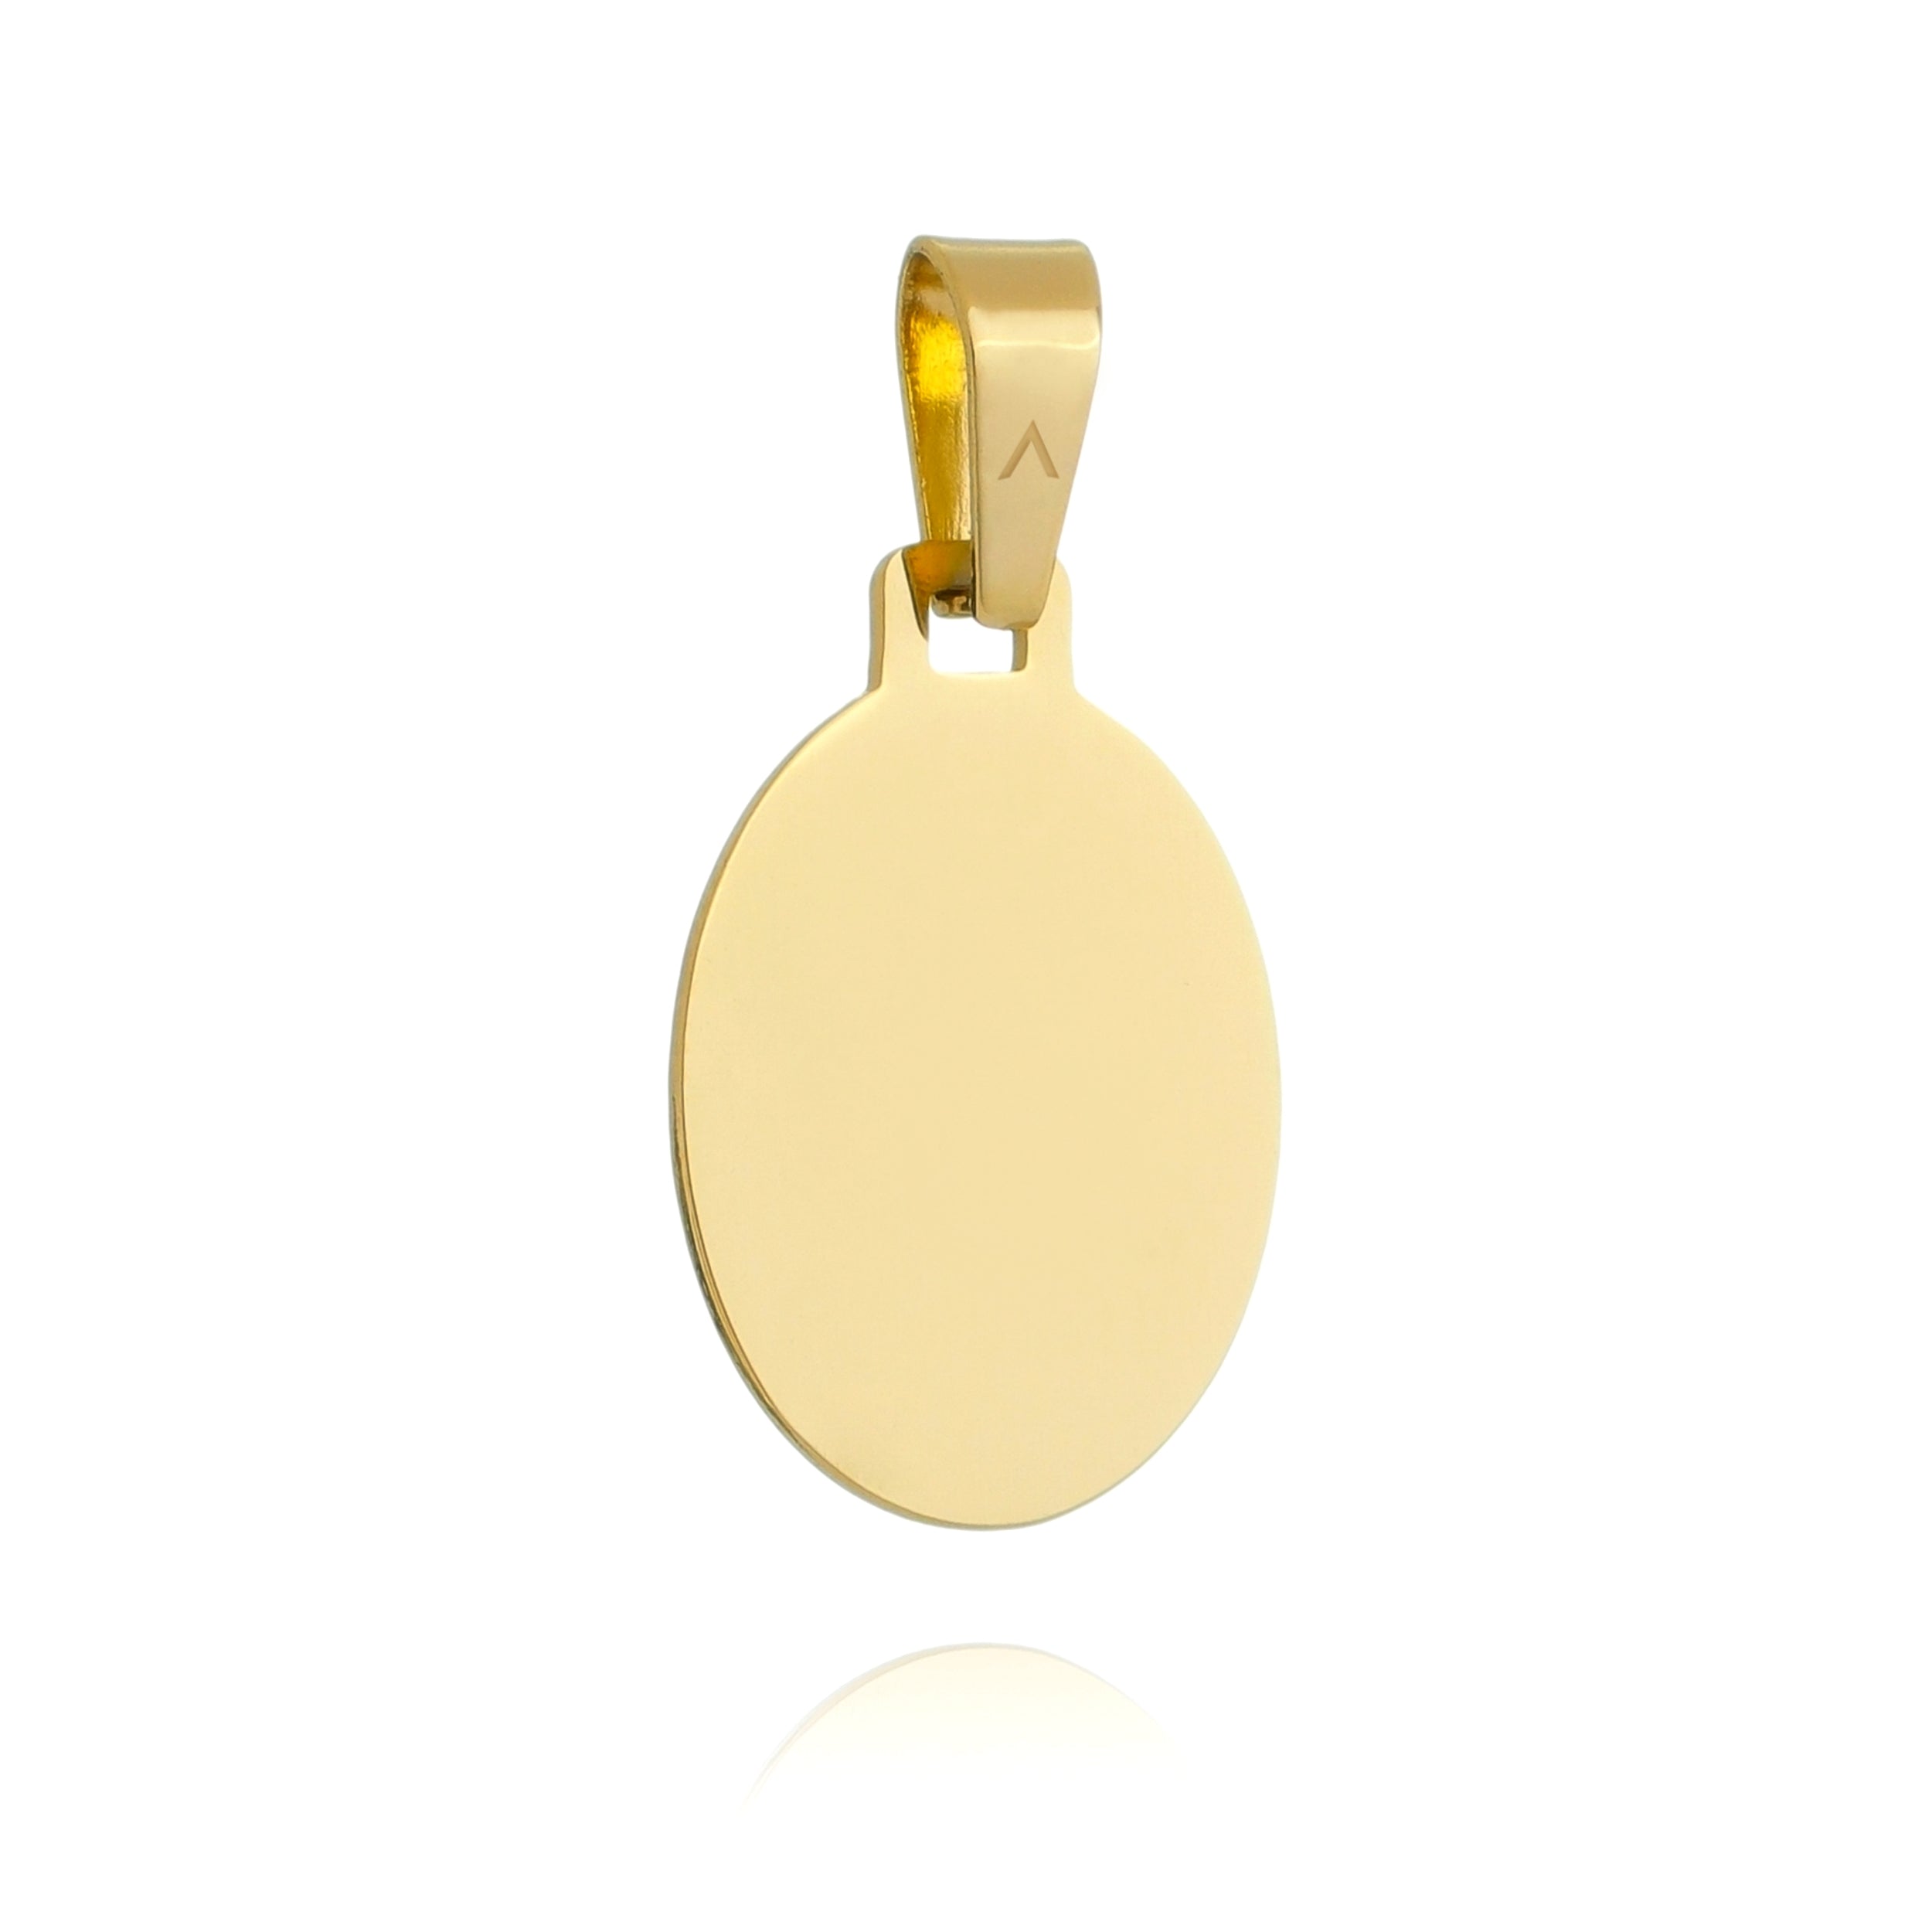 Stainless Steel Engravable Oval Pendent - Basic. We have in both Gold and Stainless Steel